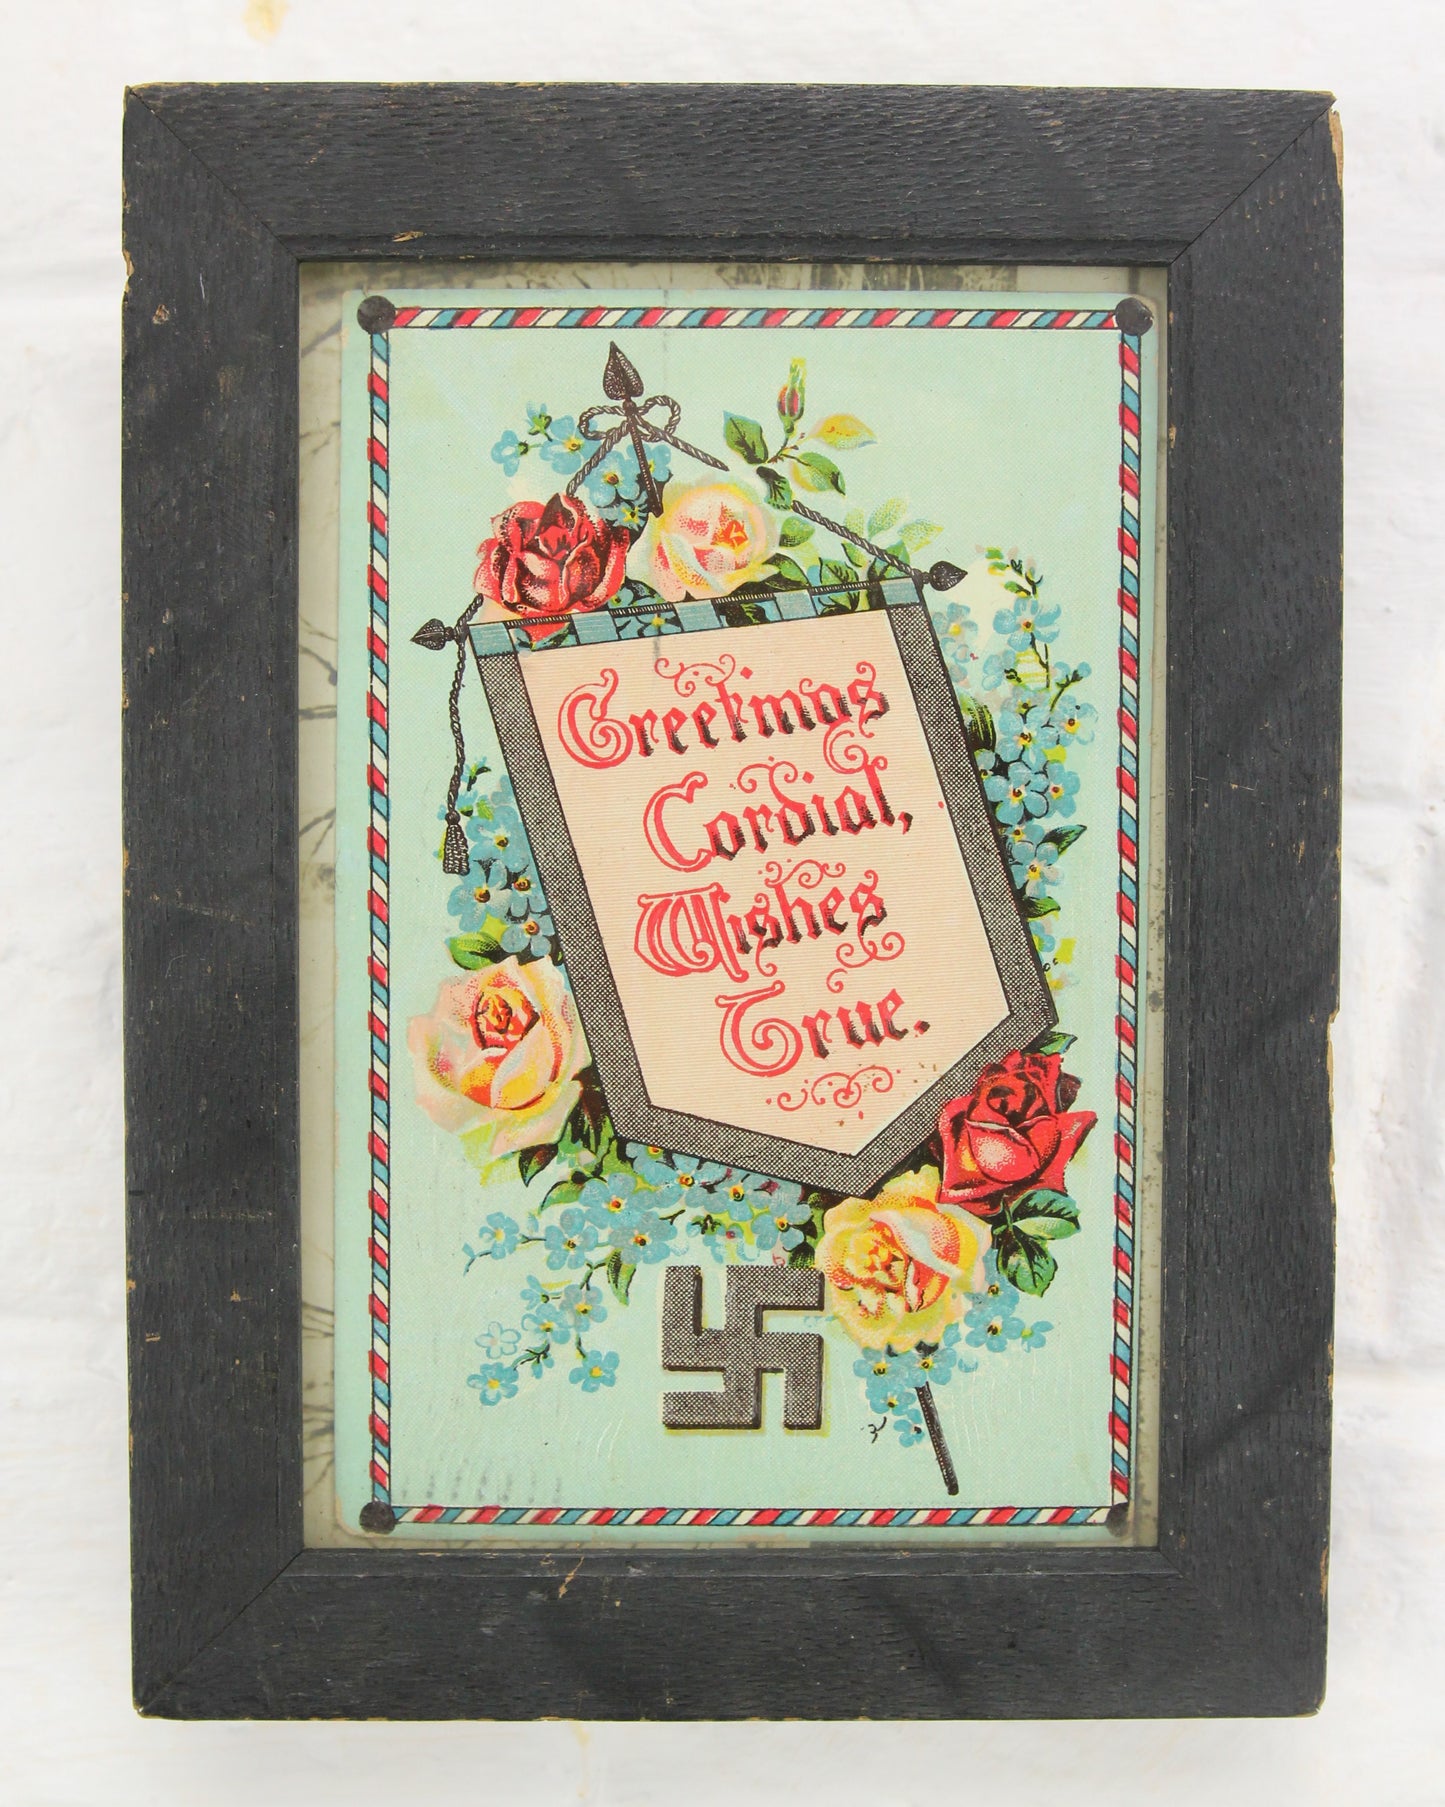 Framed 1910s Postcard "Greetings Cordial, Wishes True" with Whirling Logs Motif